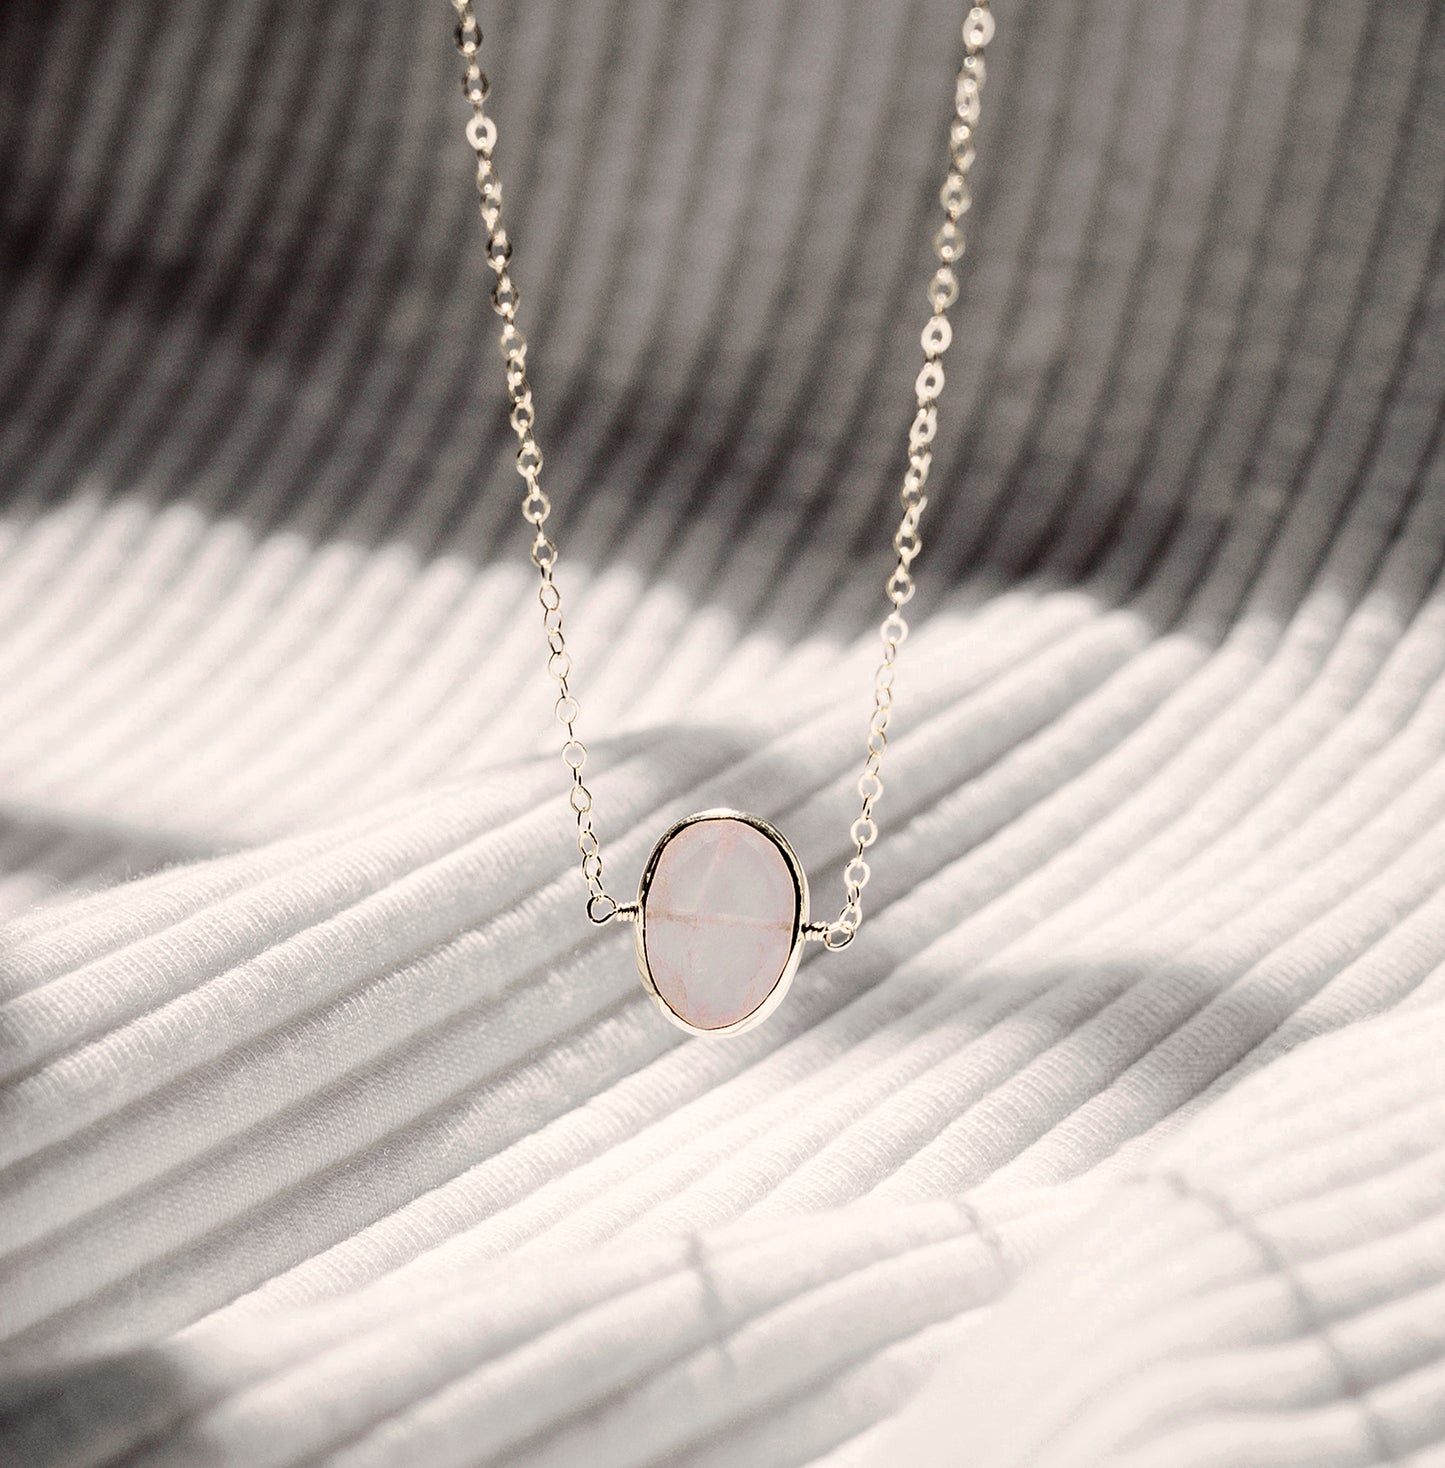 Dainty pink Rose Quartz oval coin shaped pendant with silver bezel. Chain is sterling silver.